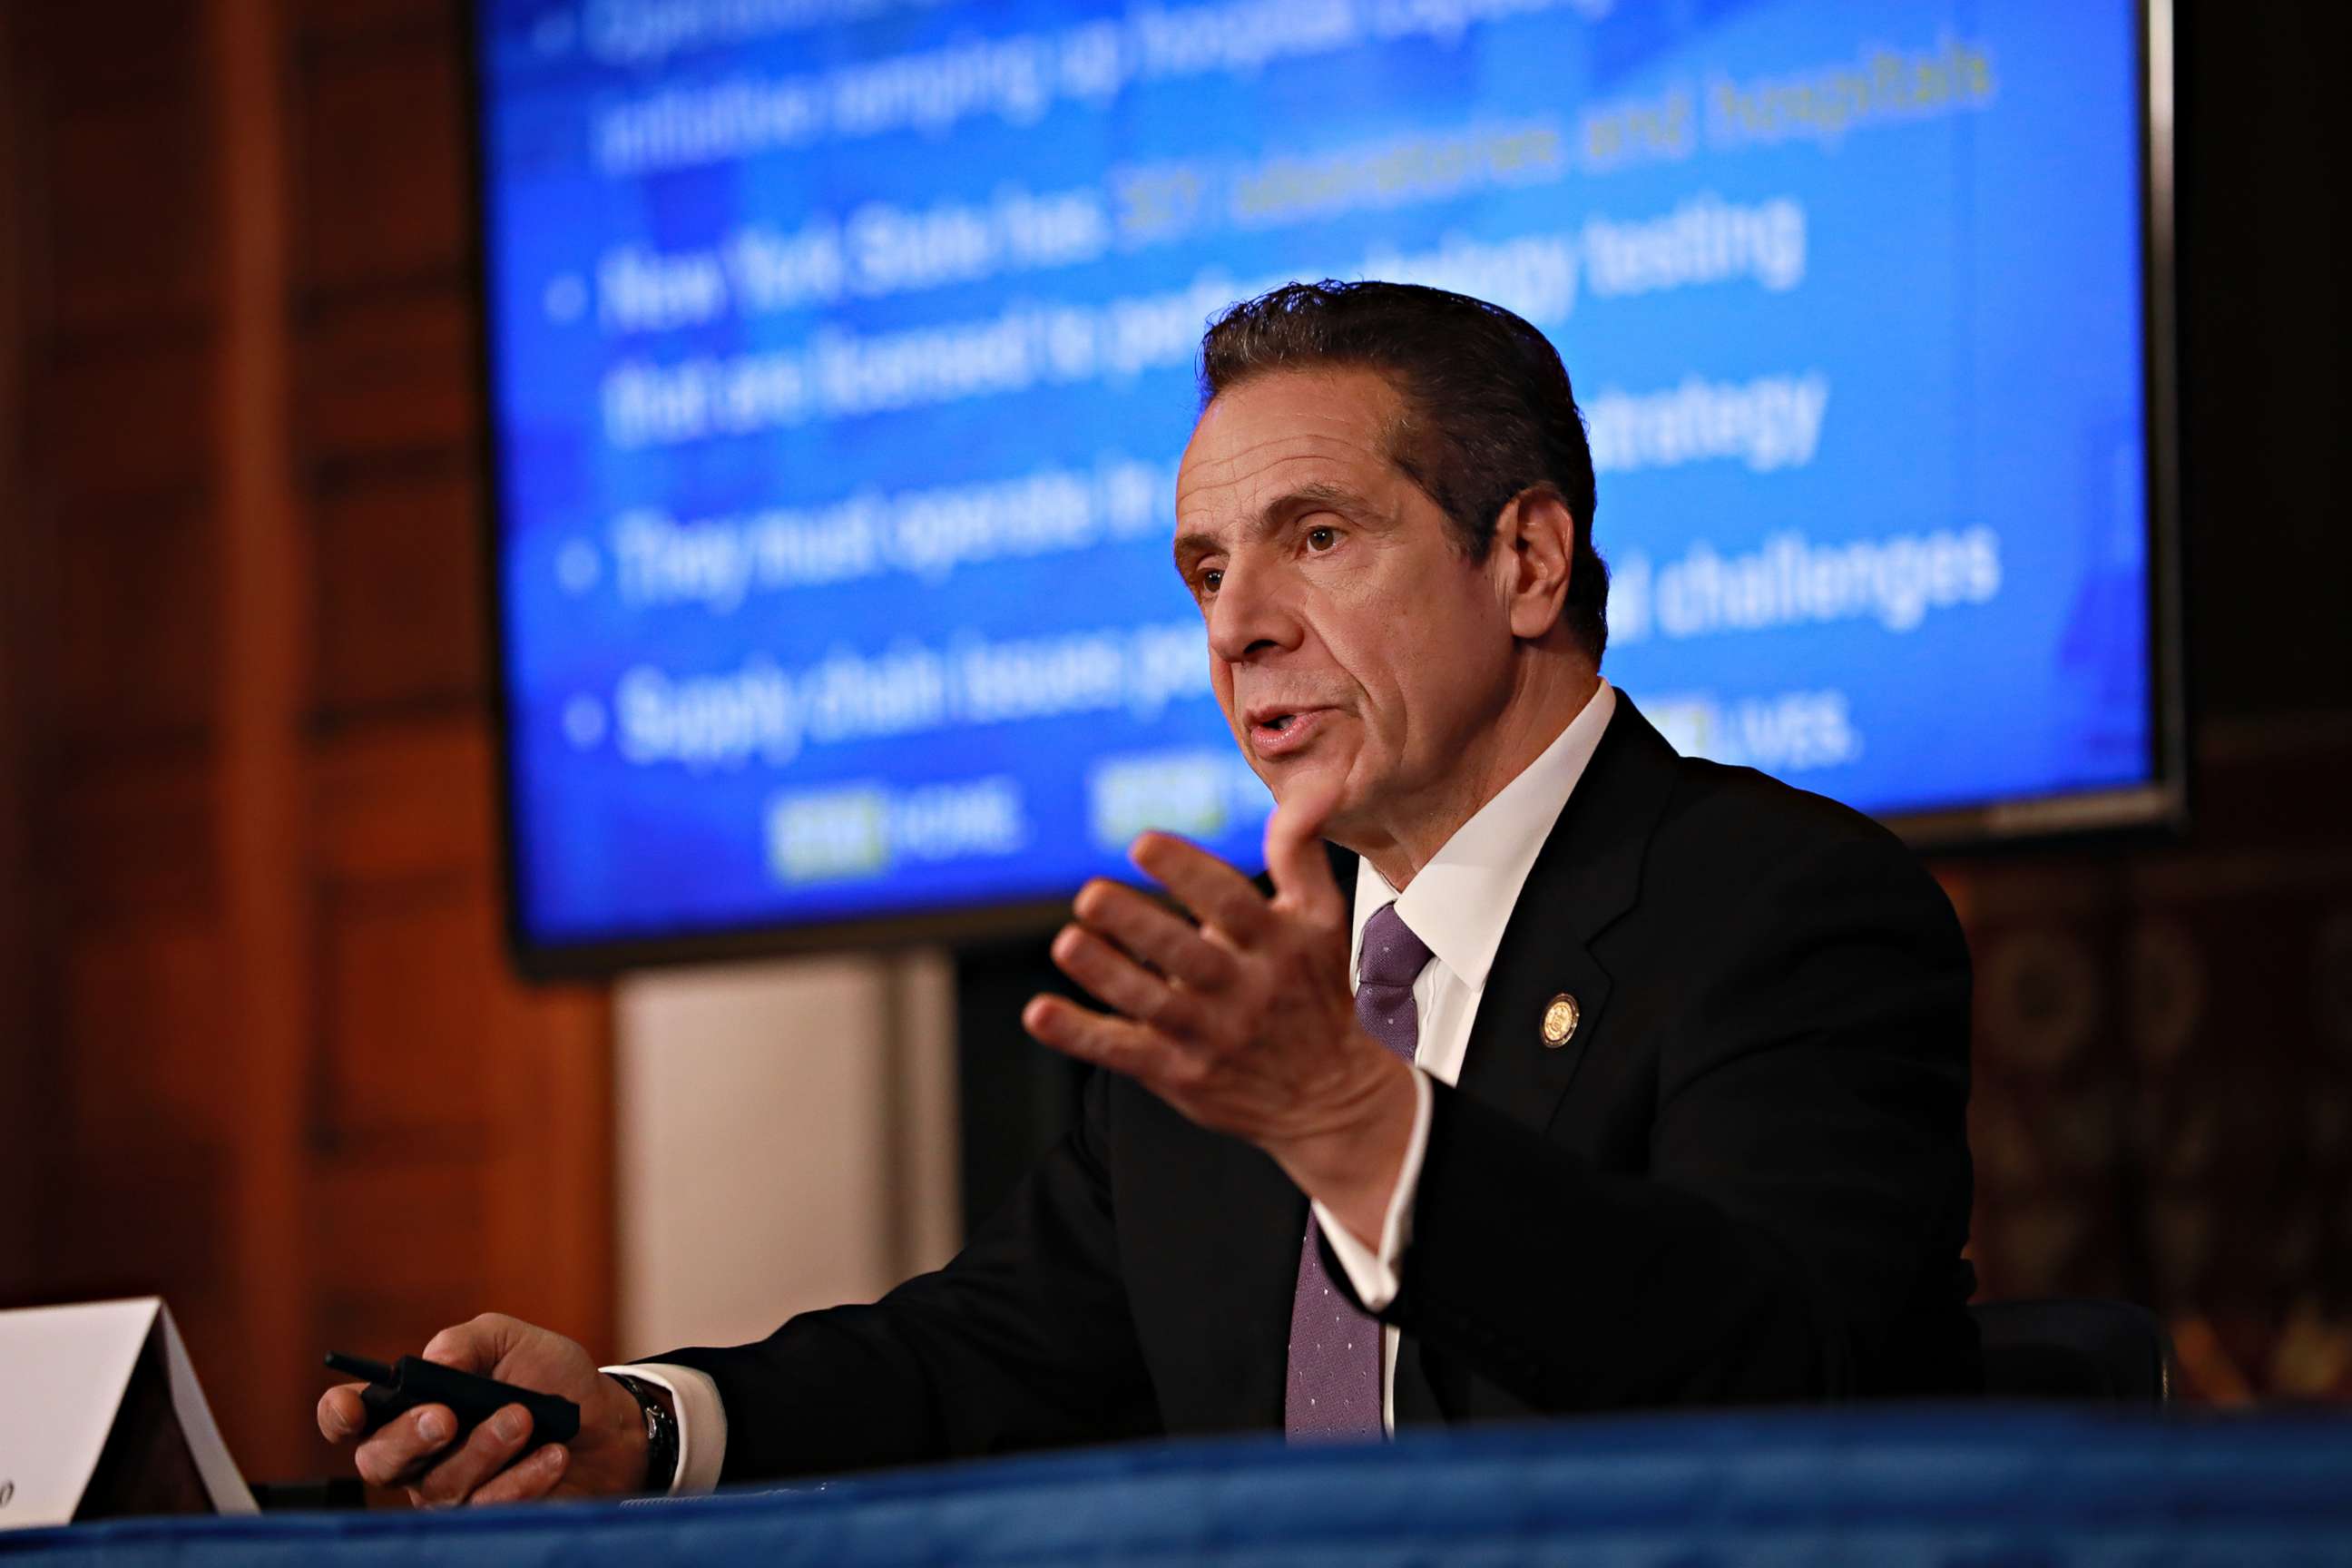 PHOTO: New York Governor Andrew Cuomo gives a press briefing about the coronavirus crisis, on April 17, 2020, in Albany, New York.